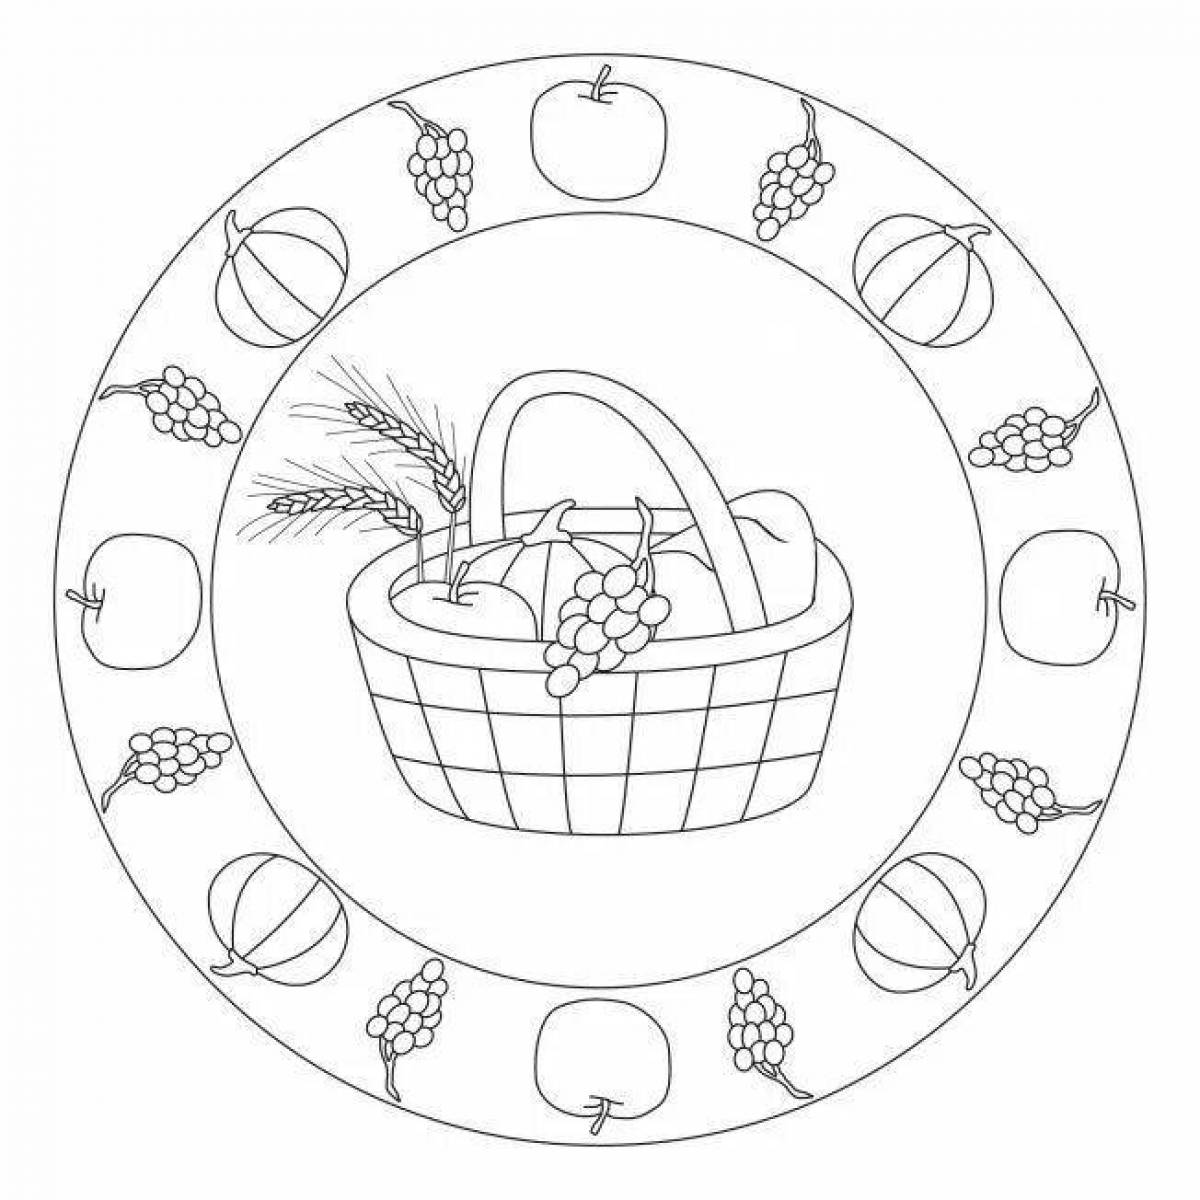 Fun plate coloring page